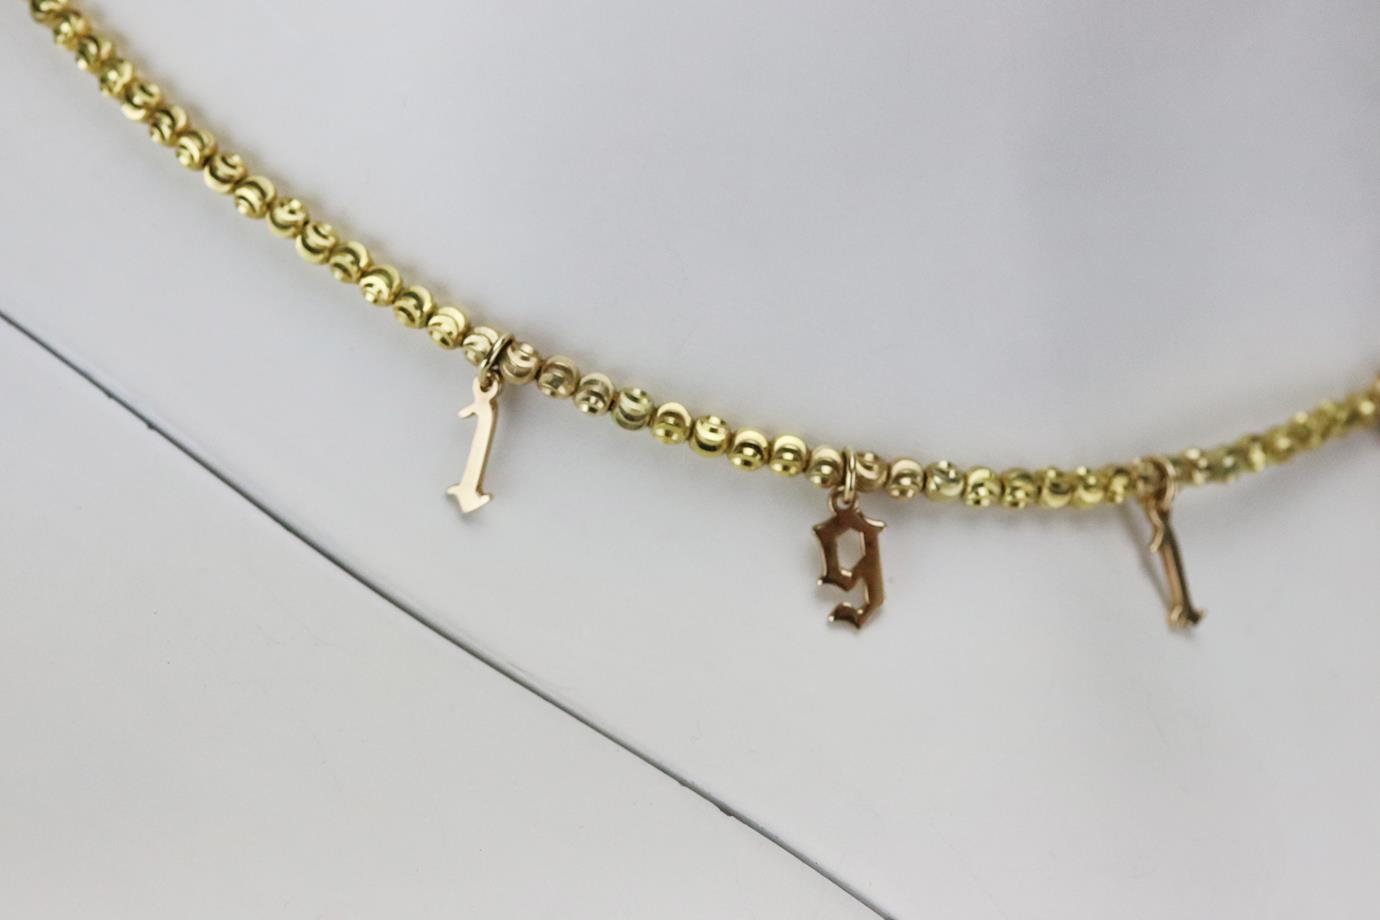 RUBY STELLA GOTHIC NUMBERS 14K YELLOW GOLD BALL CHAIN NECKLACE